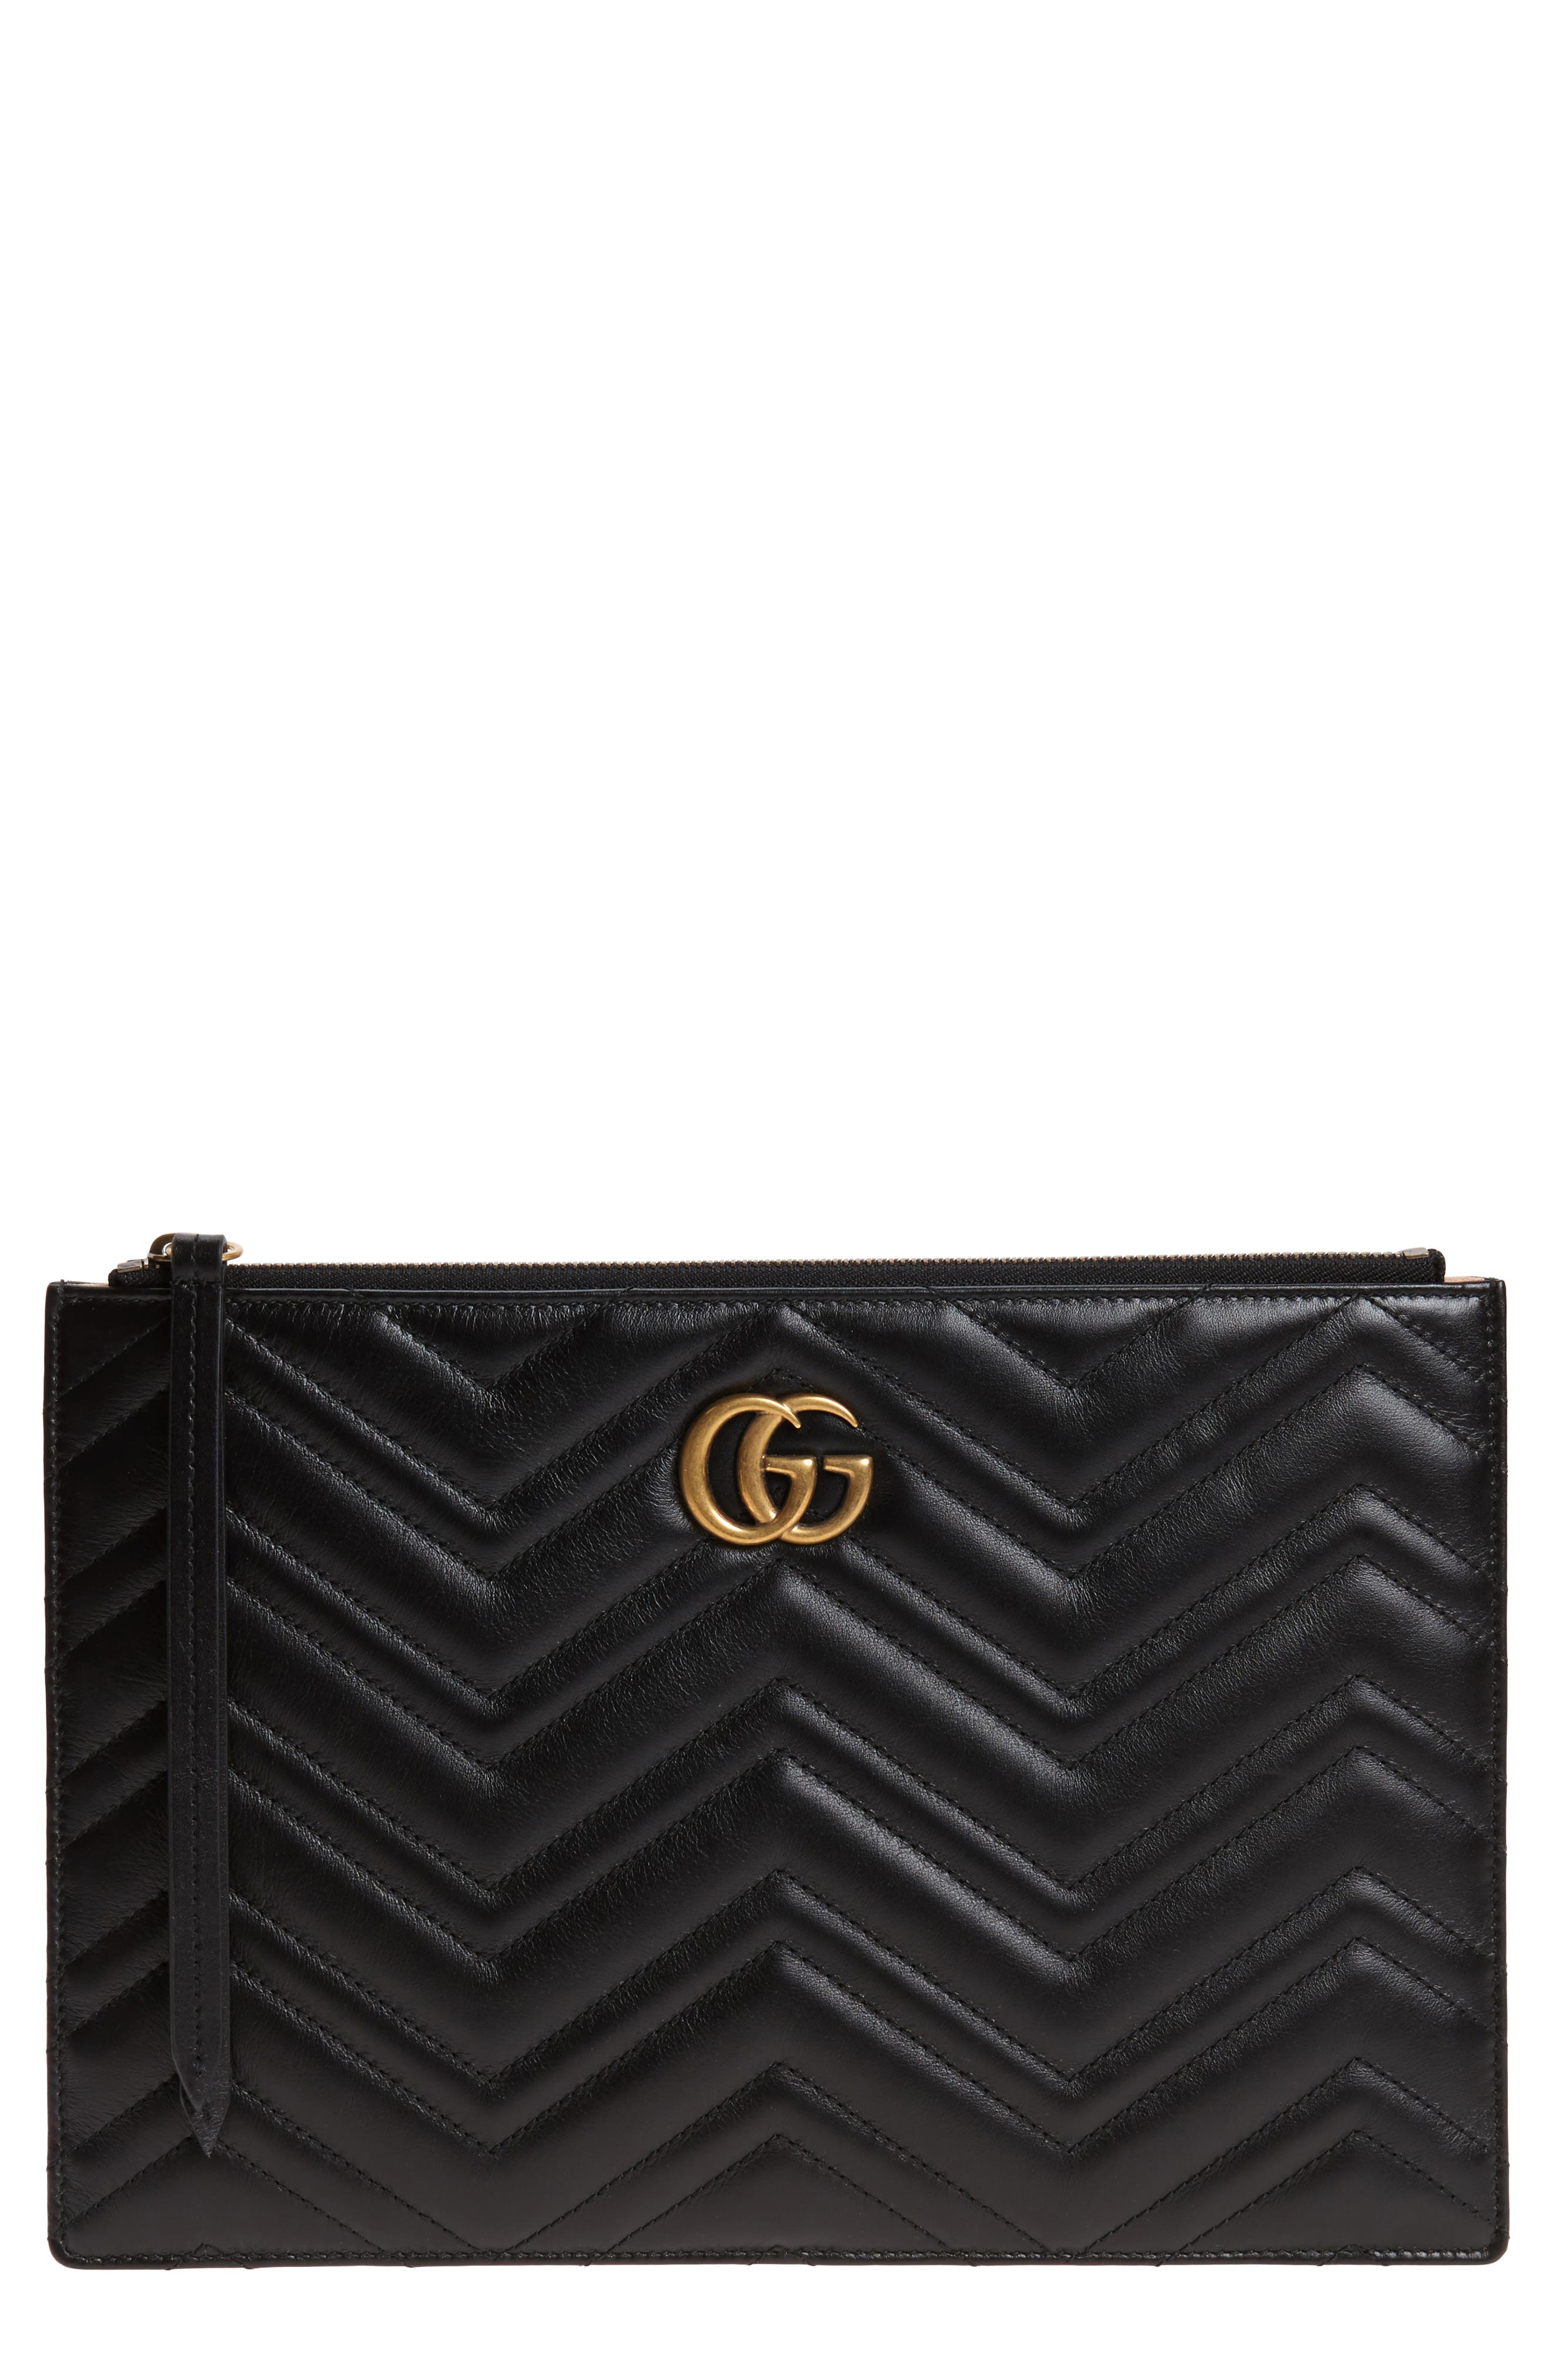 gucci leather pouch